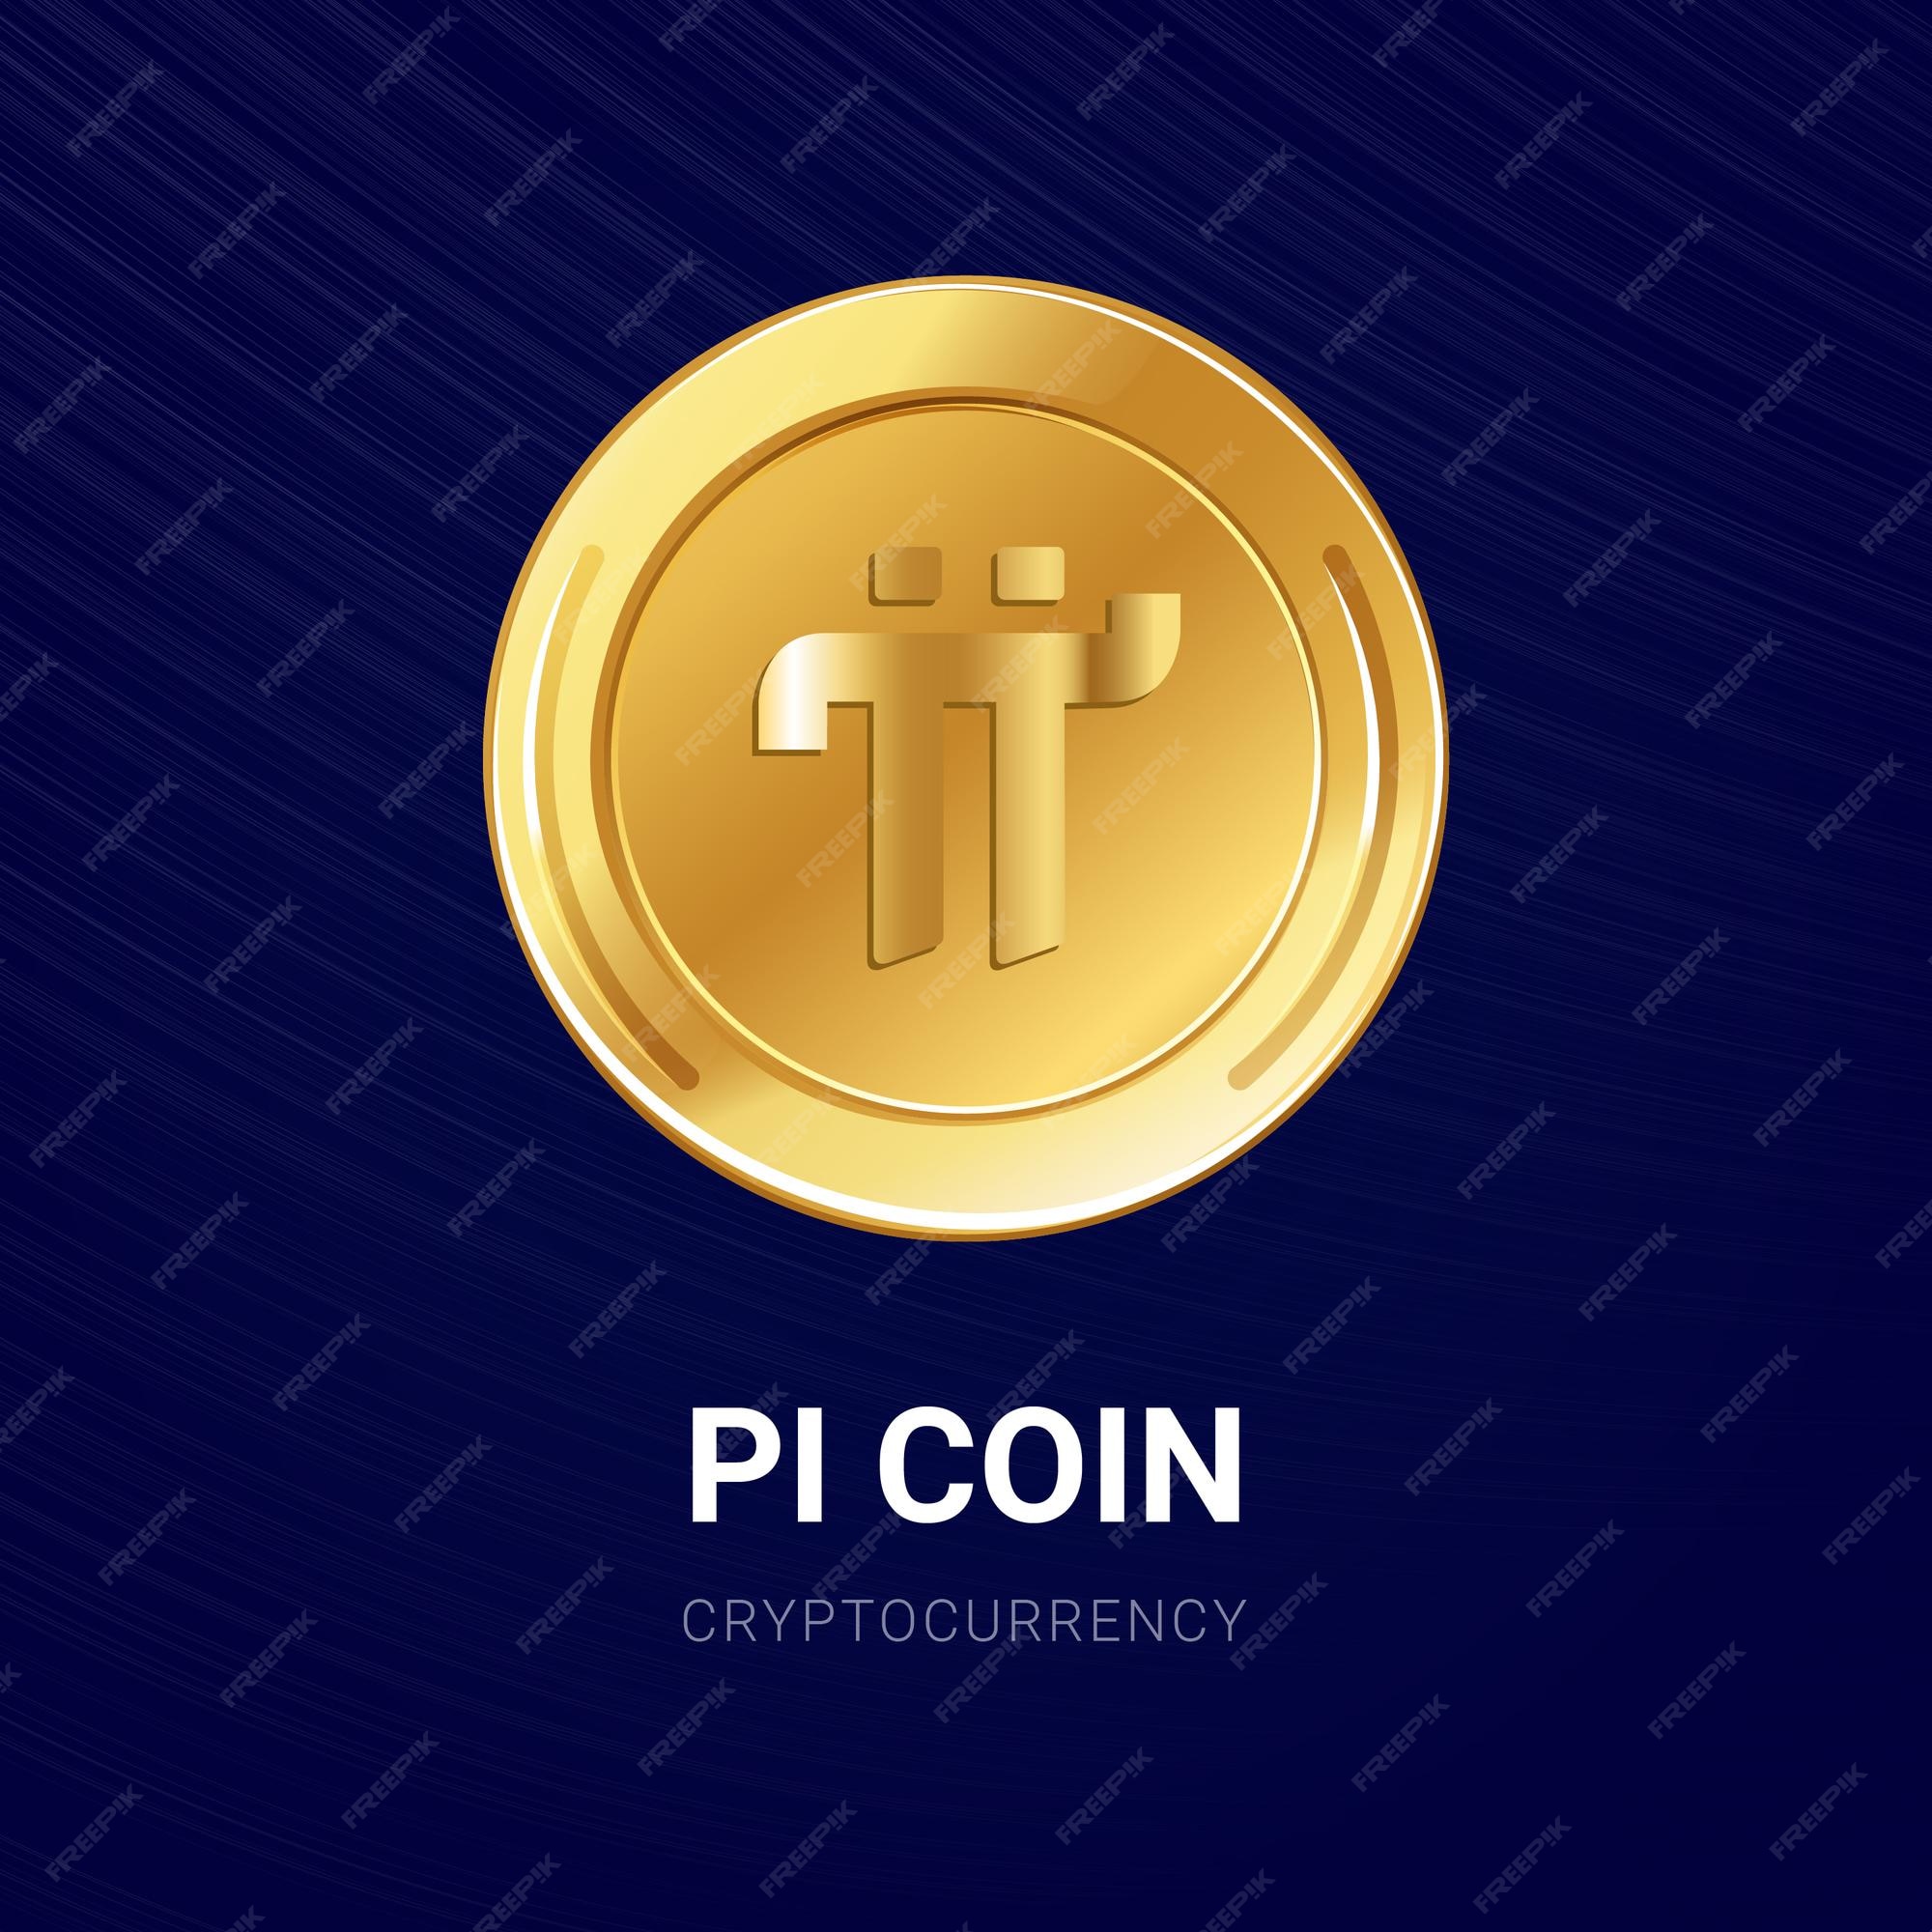 How to sell pi coin